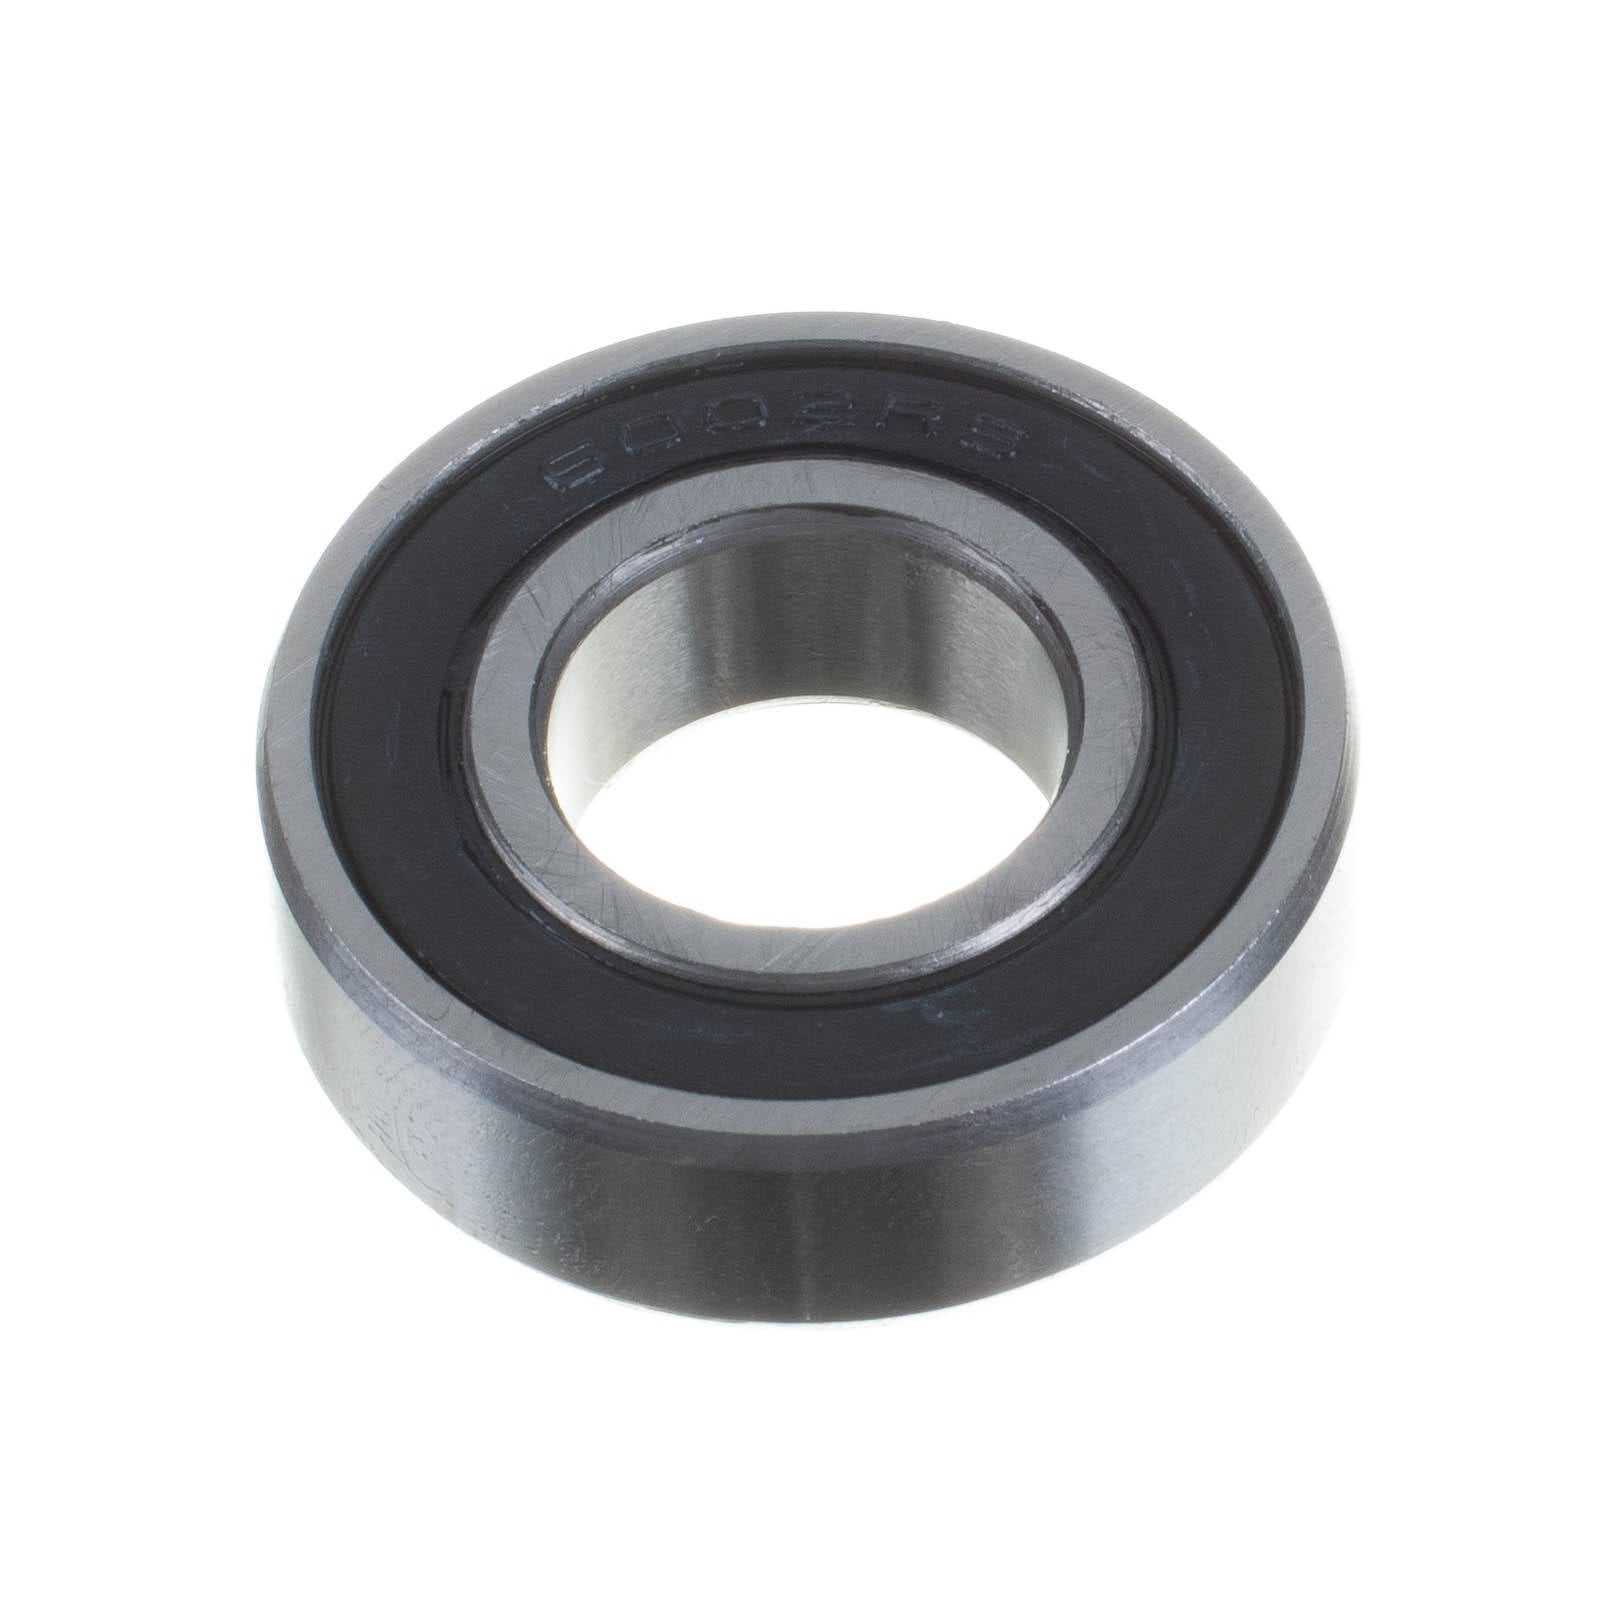 Whites Motorcycle Parts, BEARING 6002-2RS 1 PCE/EACH